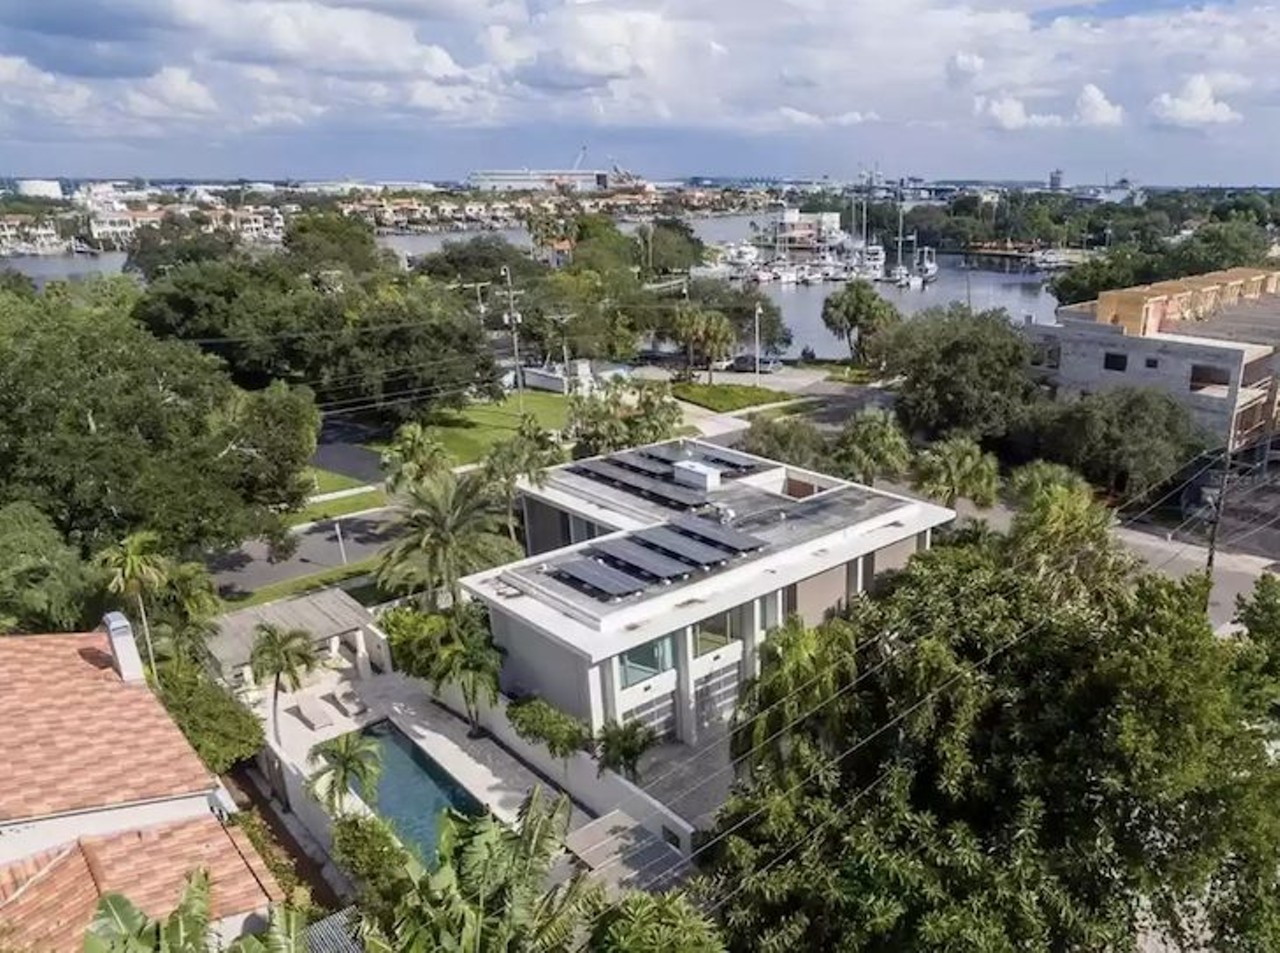 Designed by Tampa architect Robert Wielag, this $3.2 million midcentury gem is now for sale on Davis Islands